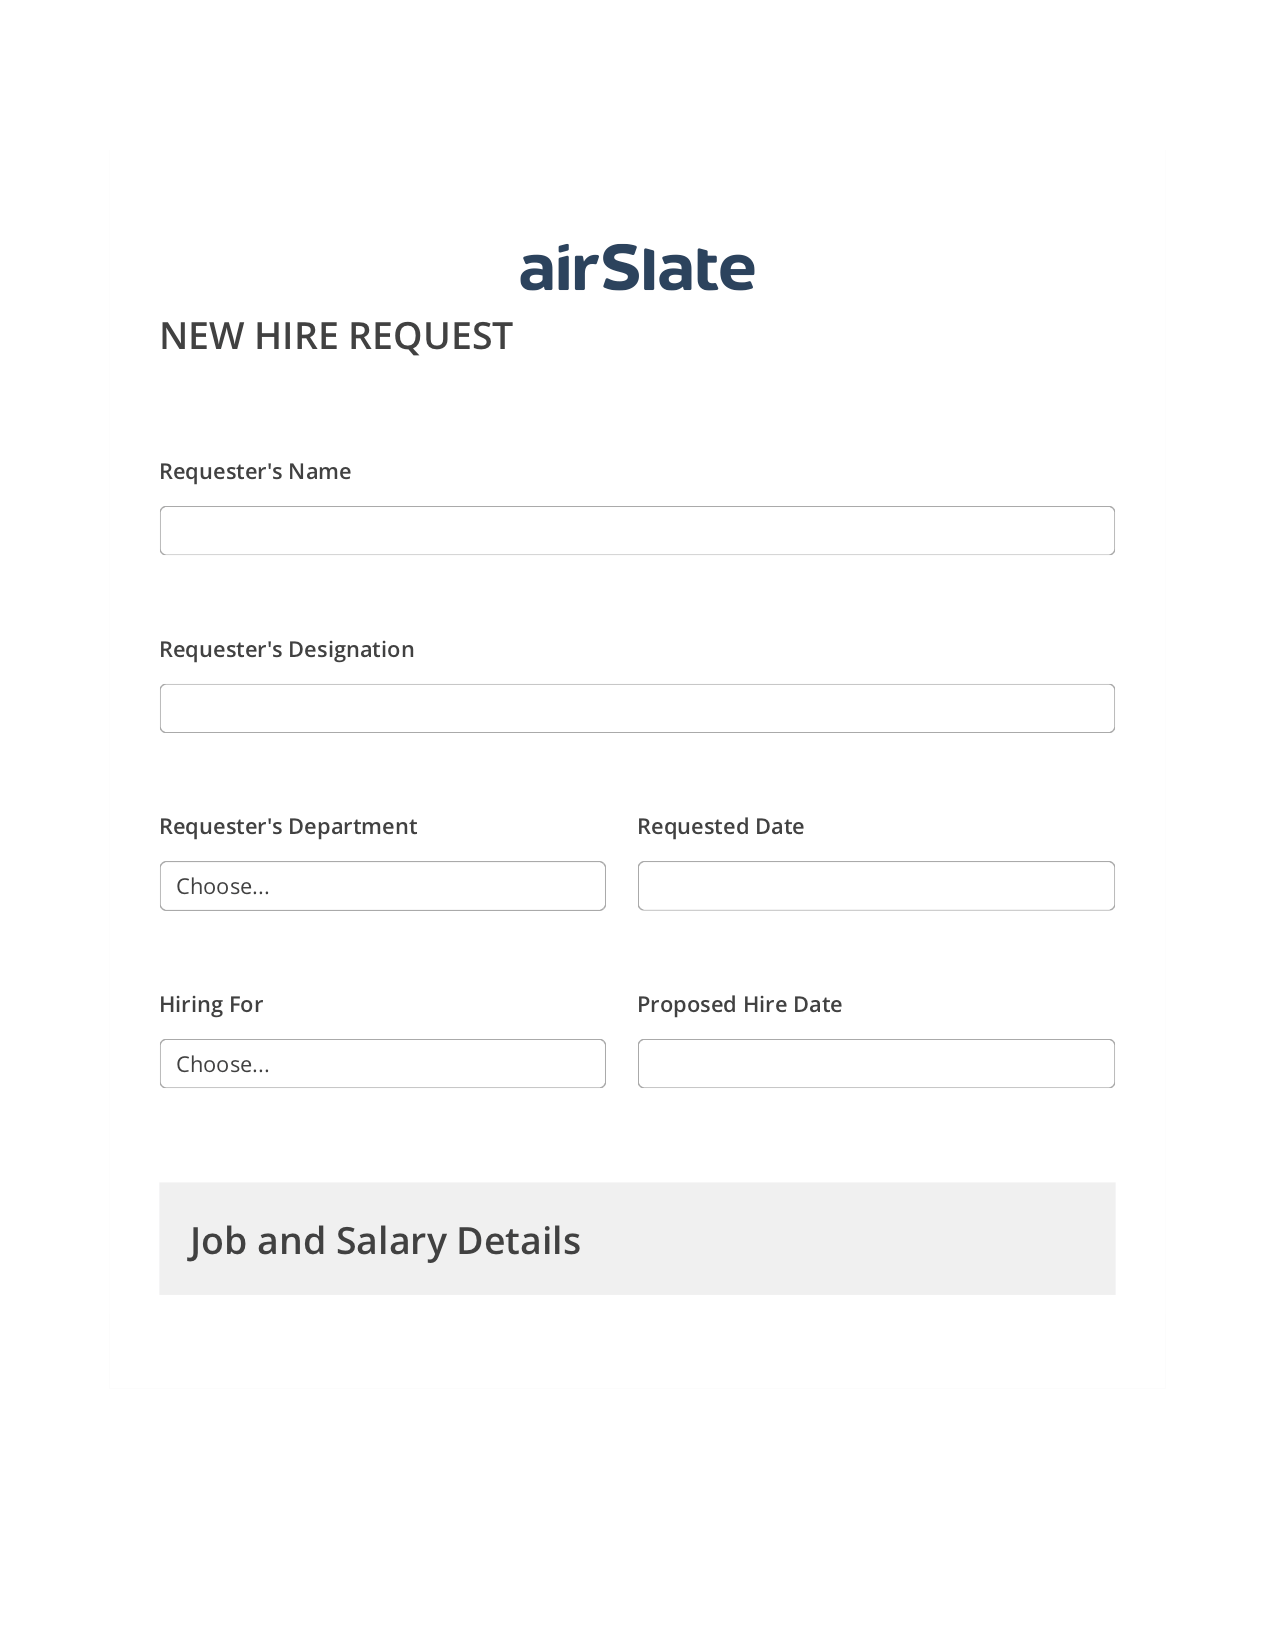 Hiring Request Workflow Pre-fill Dropdowns from MySQL Bot, Remove Tags From Slate Bot, Export to NetSuite Bot